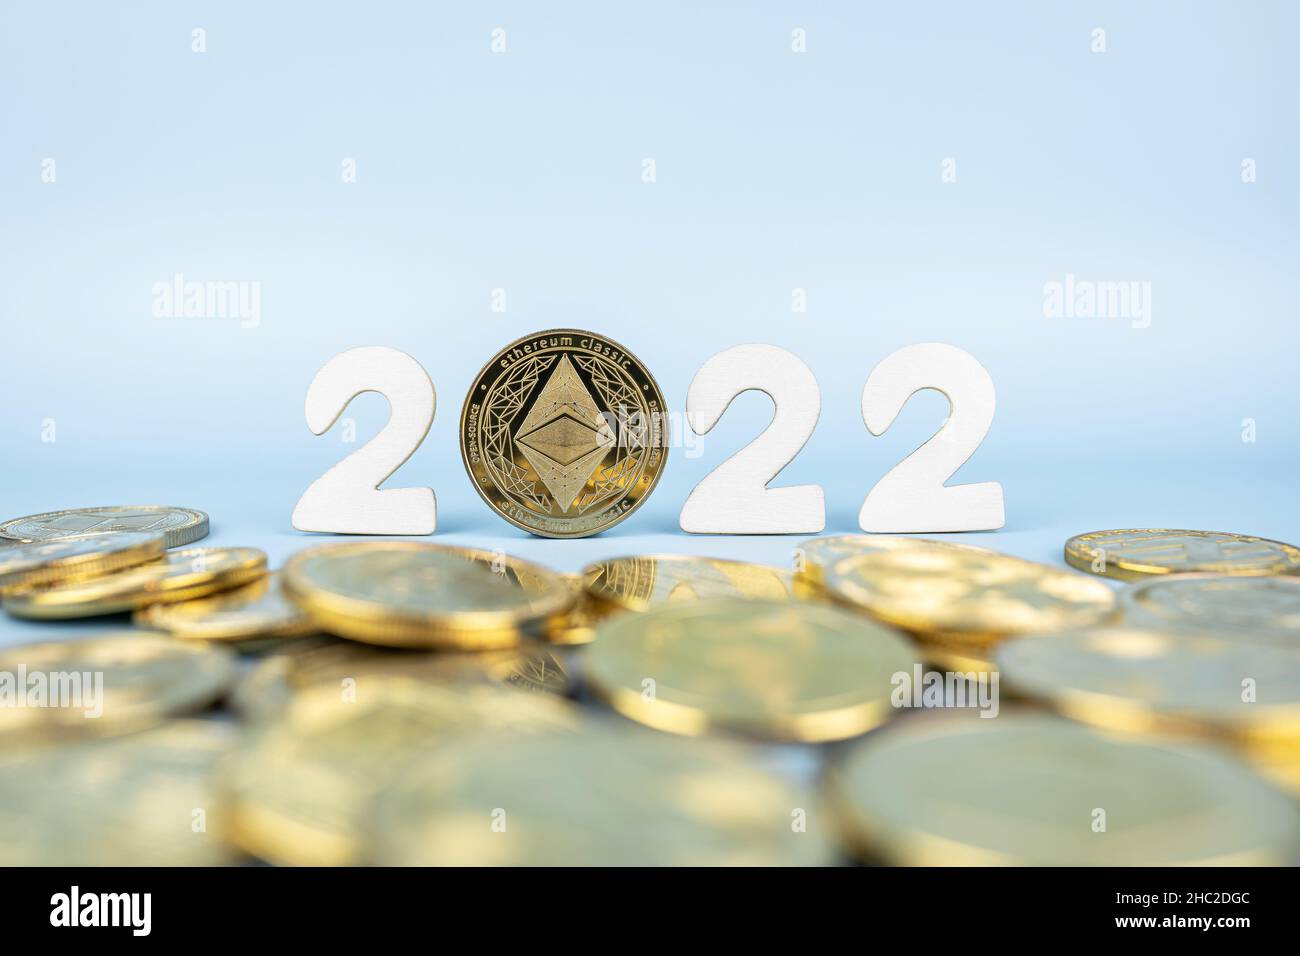 Ethereum 2022 price prediction concept. Ether coin standing next to cryptocurrency tokens and year numbers on blue background. Close-up, soft focus. Stock Photo